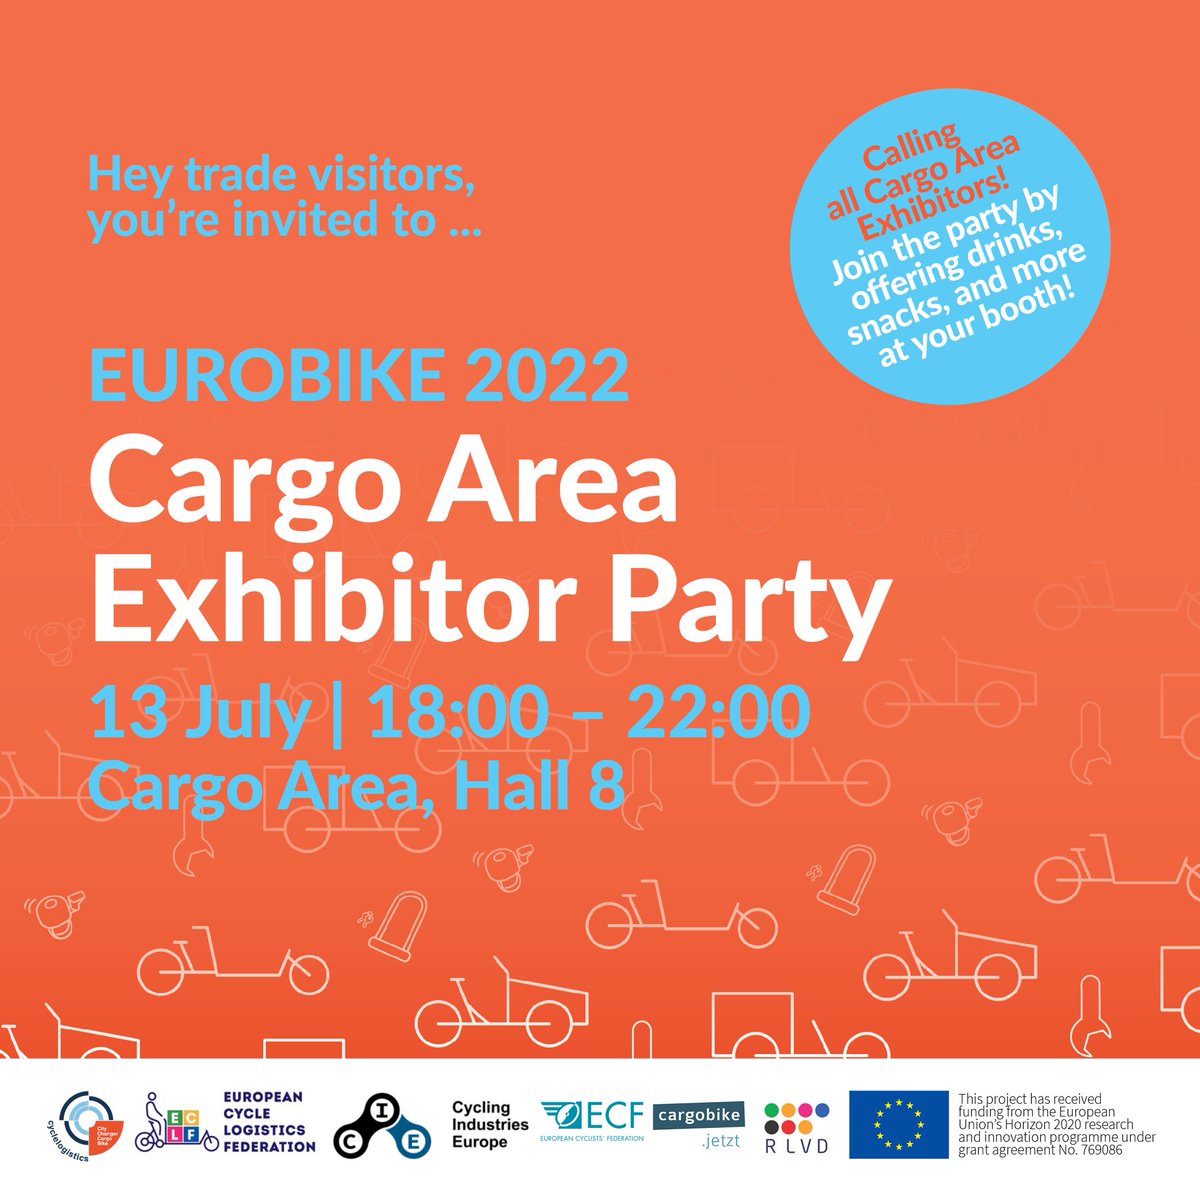 Hey EUROBIKE 2022 trade visitors! Come meet the Cargo Area Exhibitors and enjoy drinks, snacks, music and more 🎊 July 13, 18:00 - 22:00, Cargo Area.